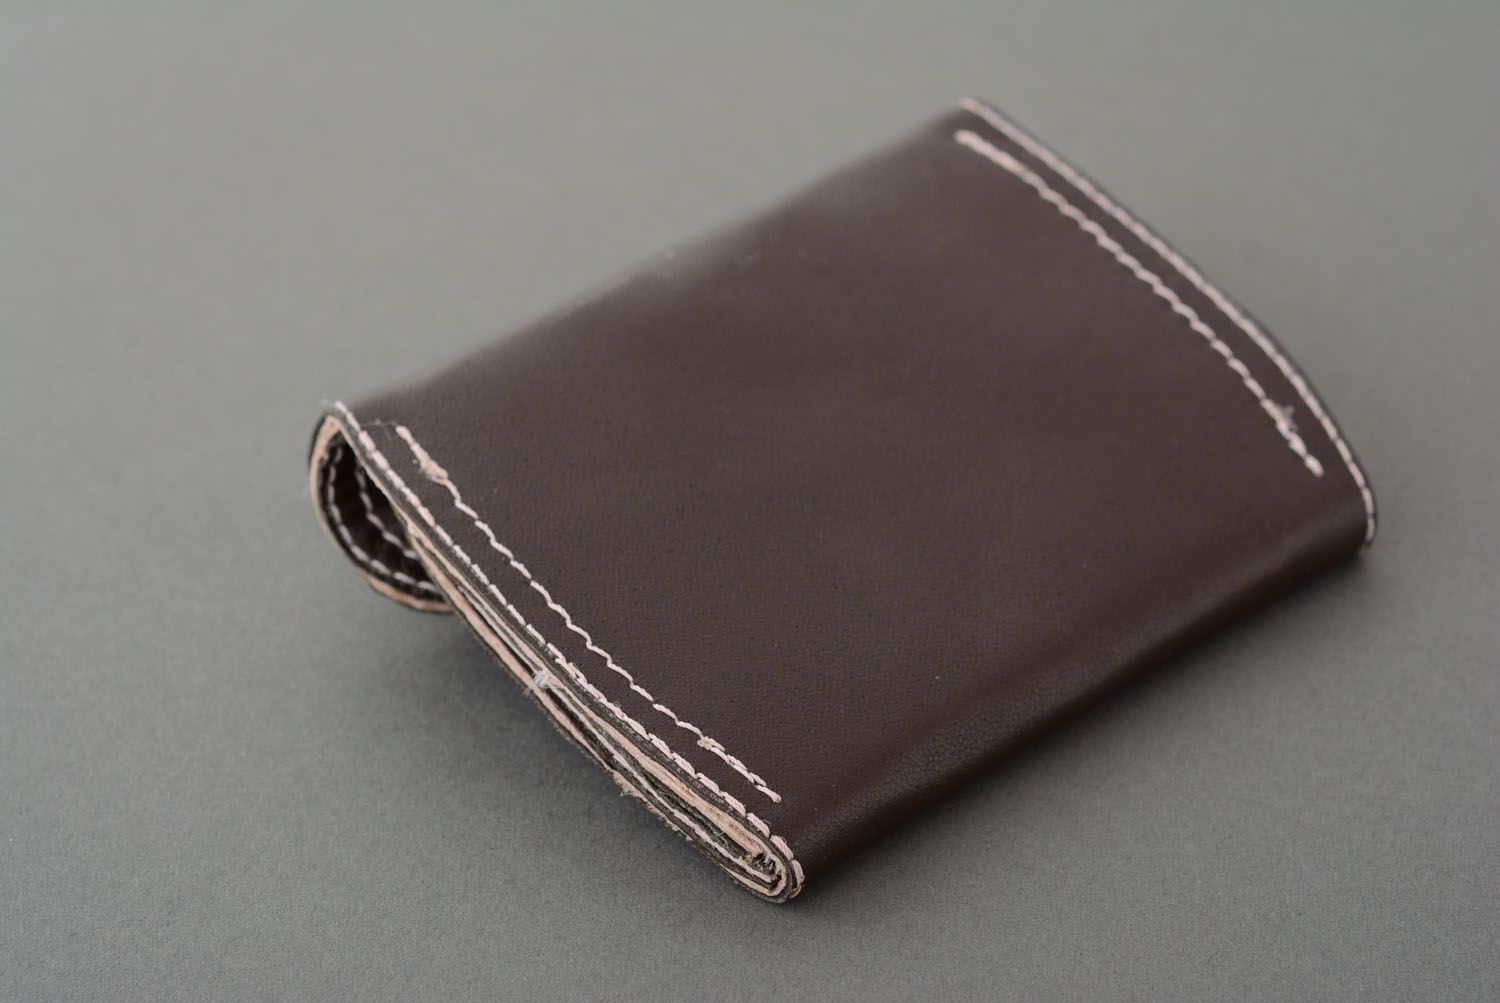 Homemade leather purse for coins photo 4